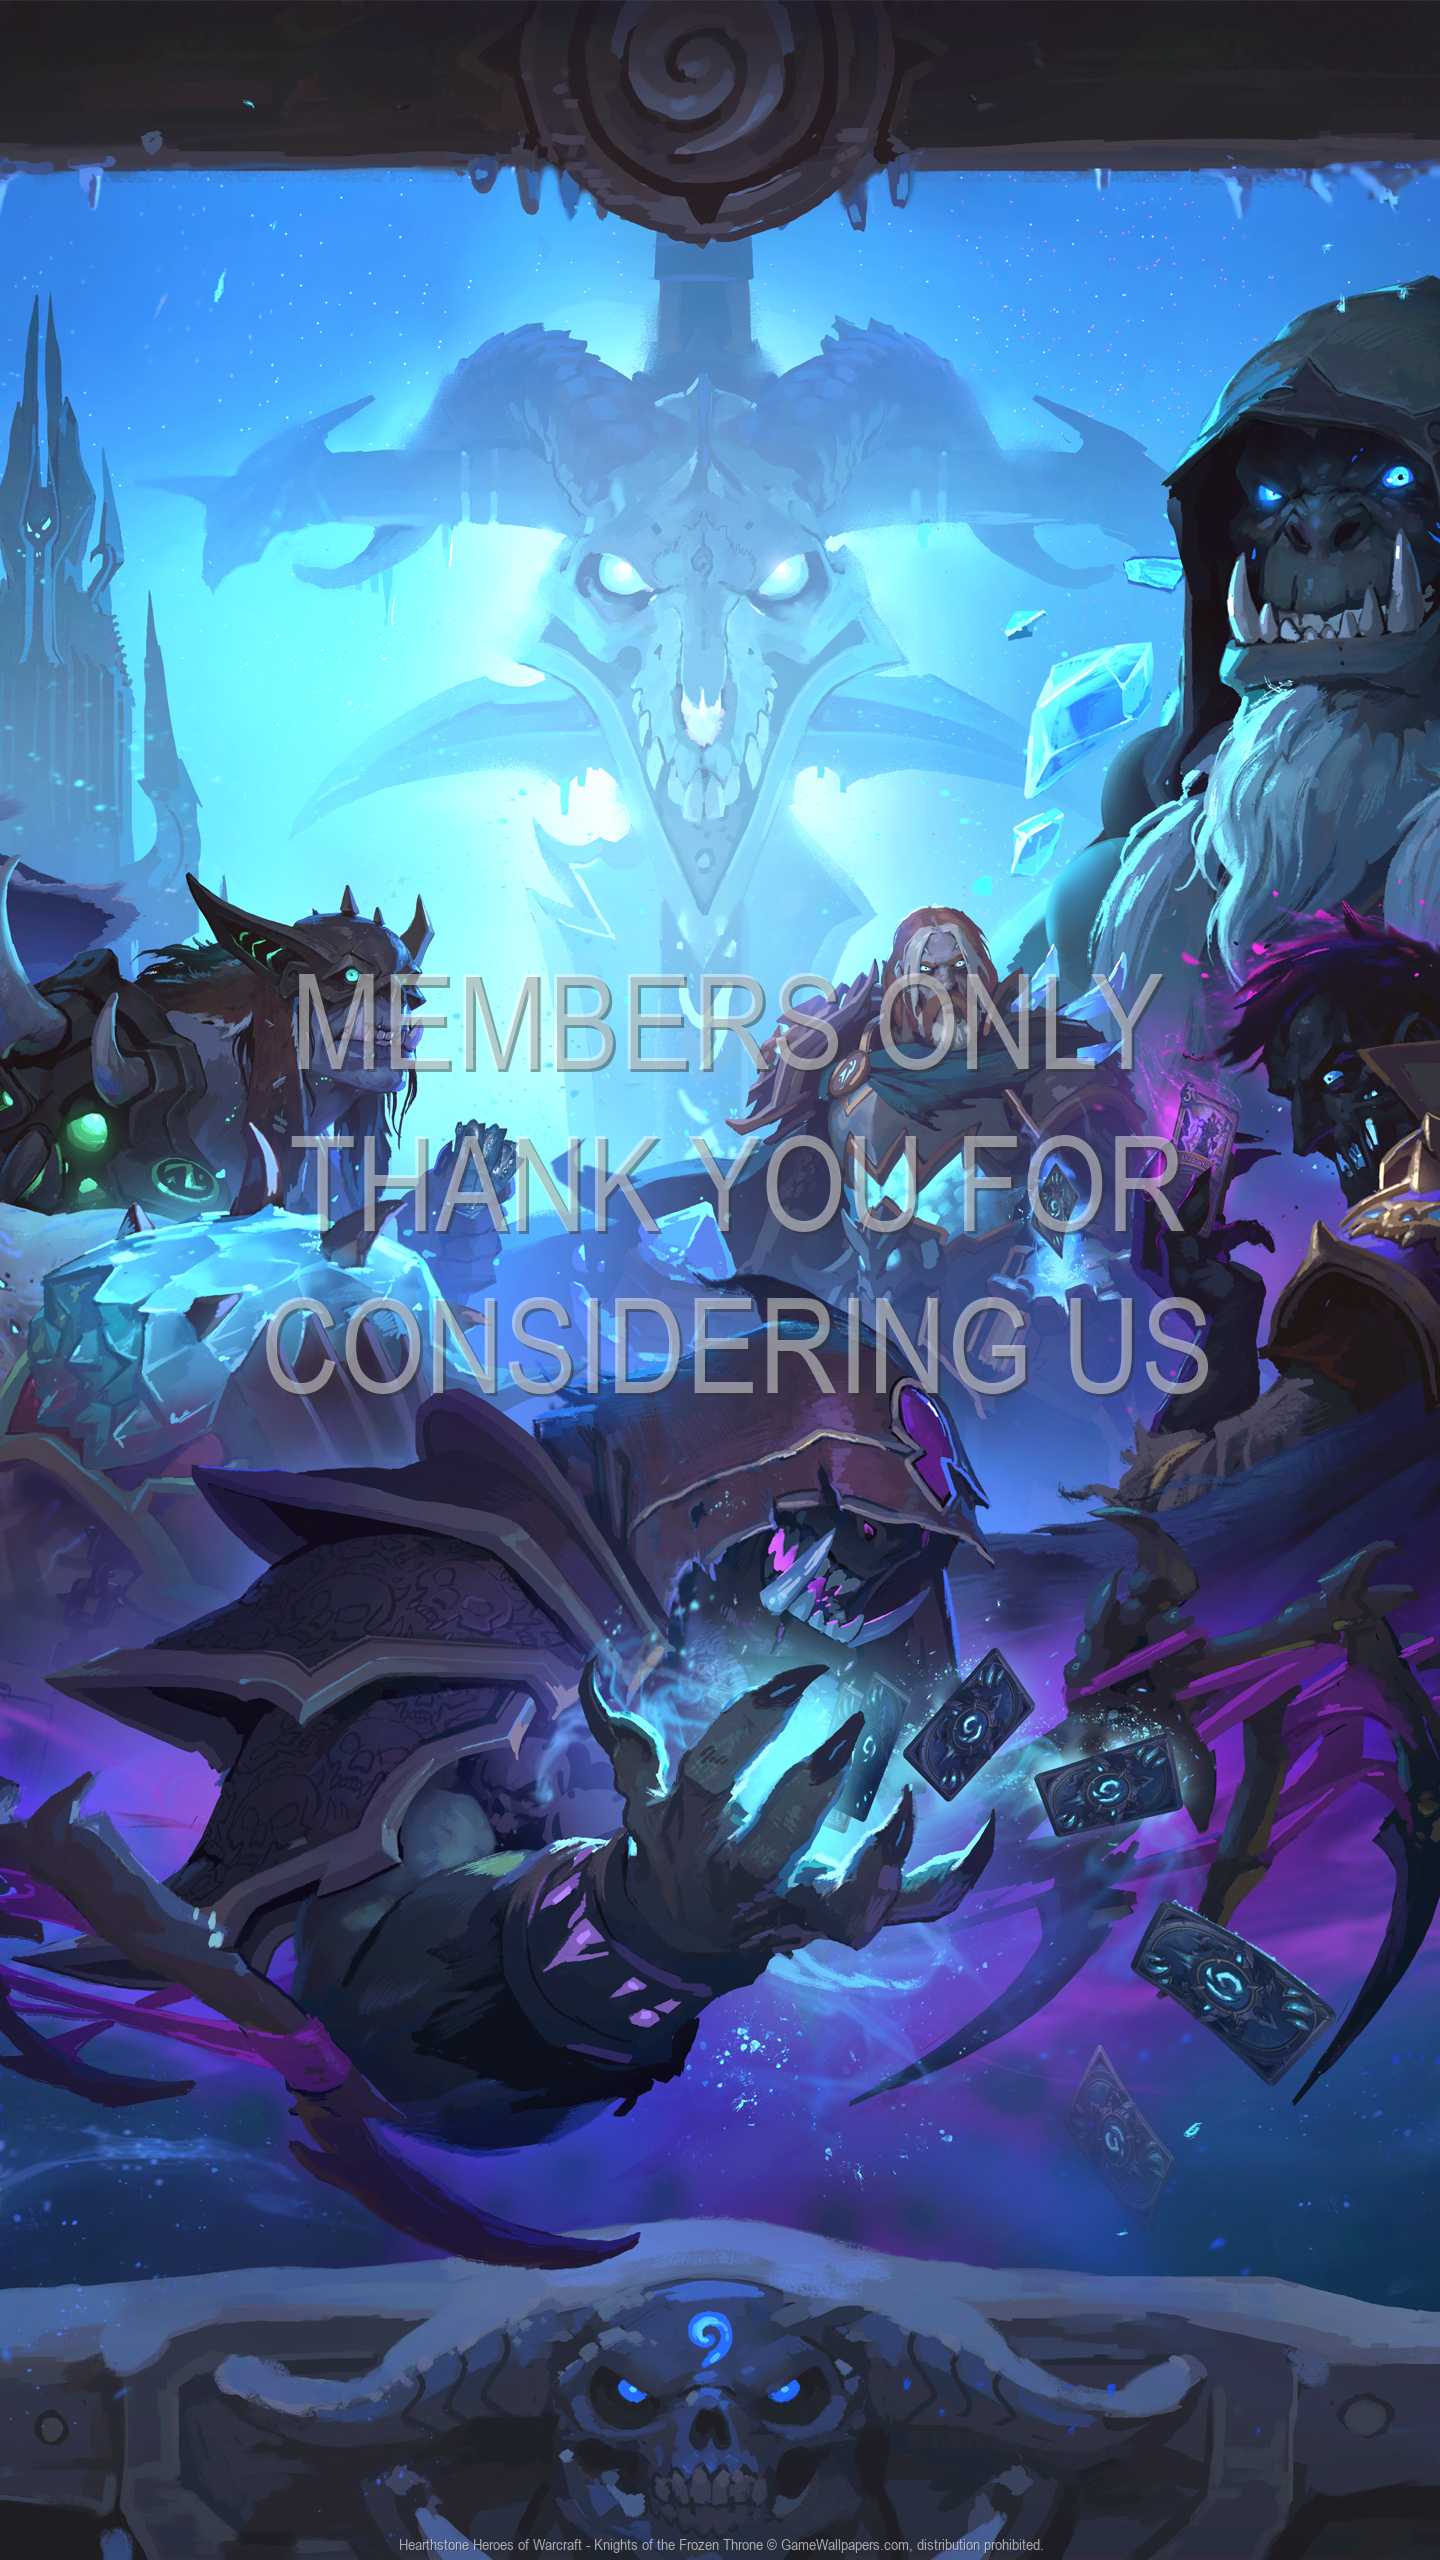 Hearthstone: Heroes of Warcraft - Knights of the Frozen Throne 1440p Vertical Mobile fond d'cran 04